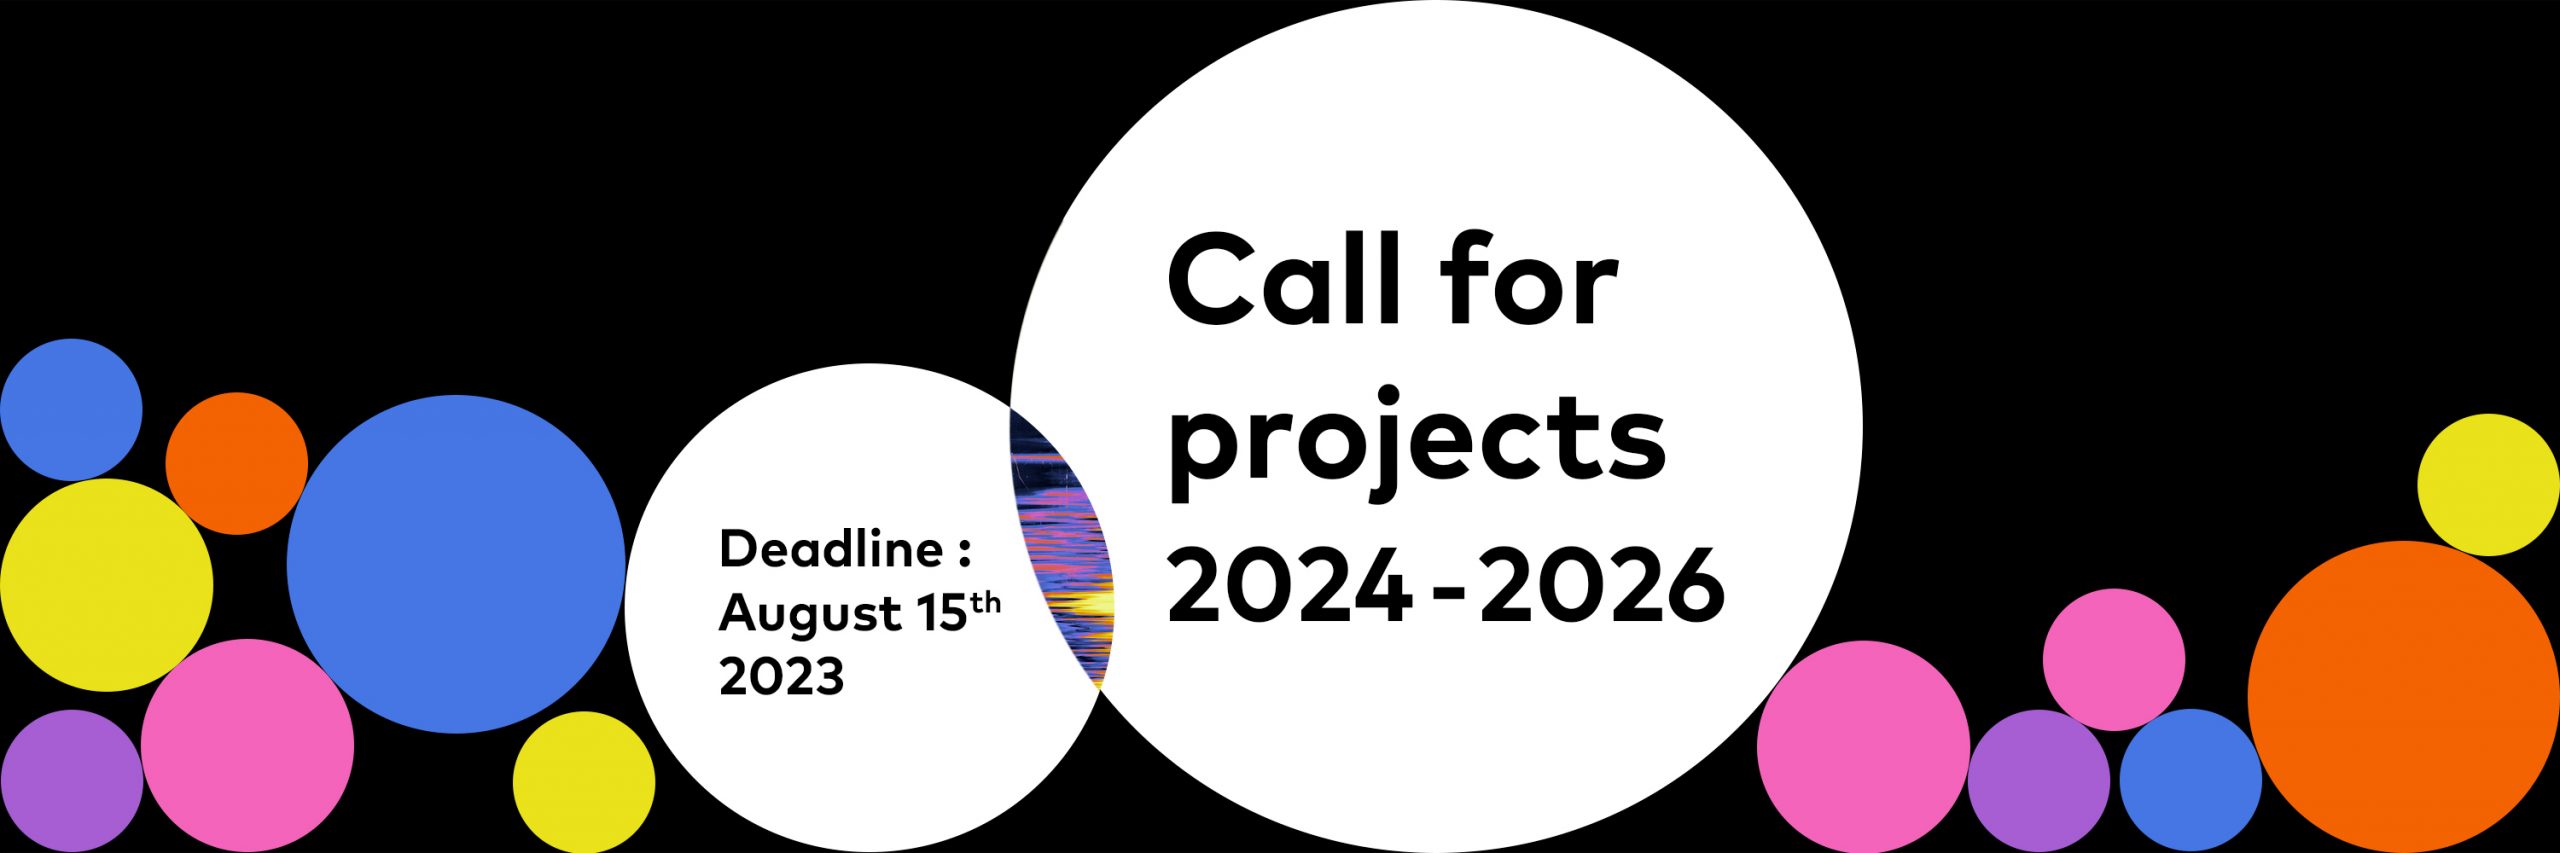 Call for projects 2024-2026 | Deadline: August 15th 2023